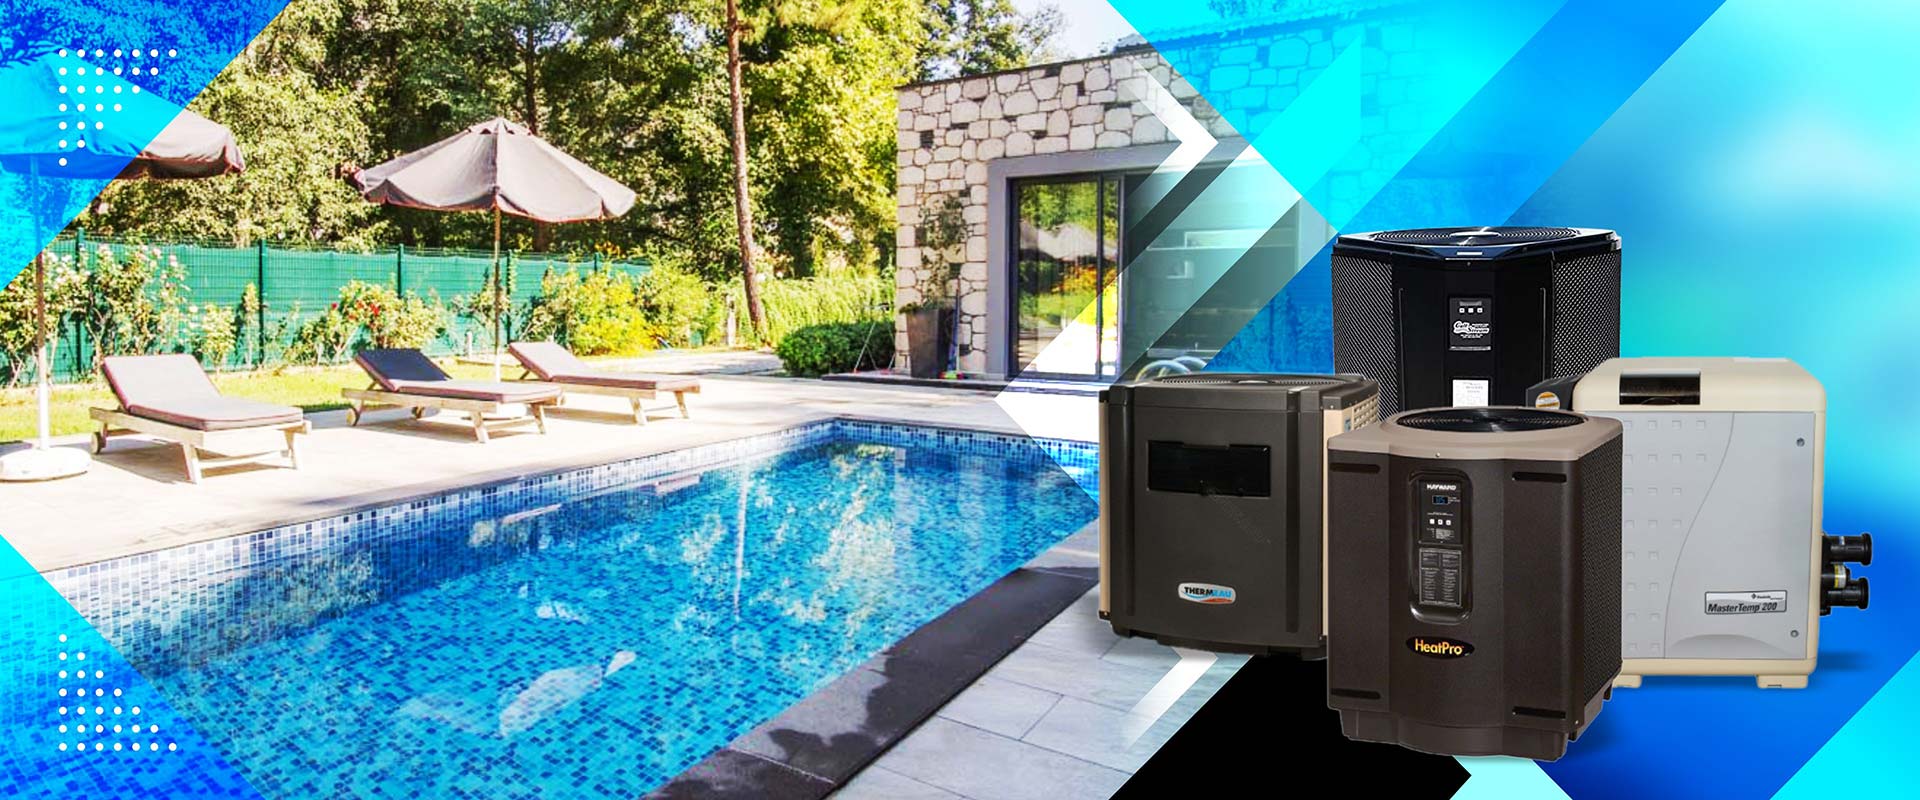 Pool heater products and services